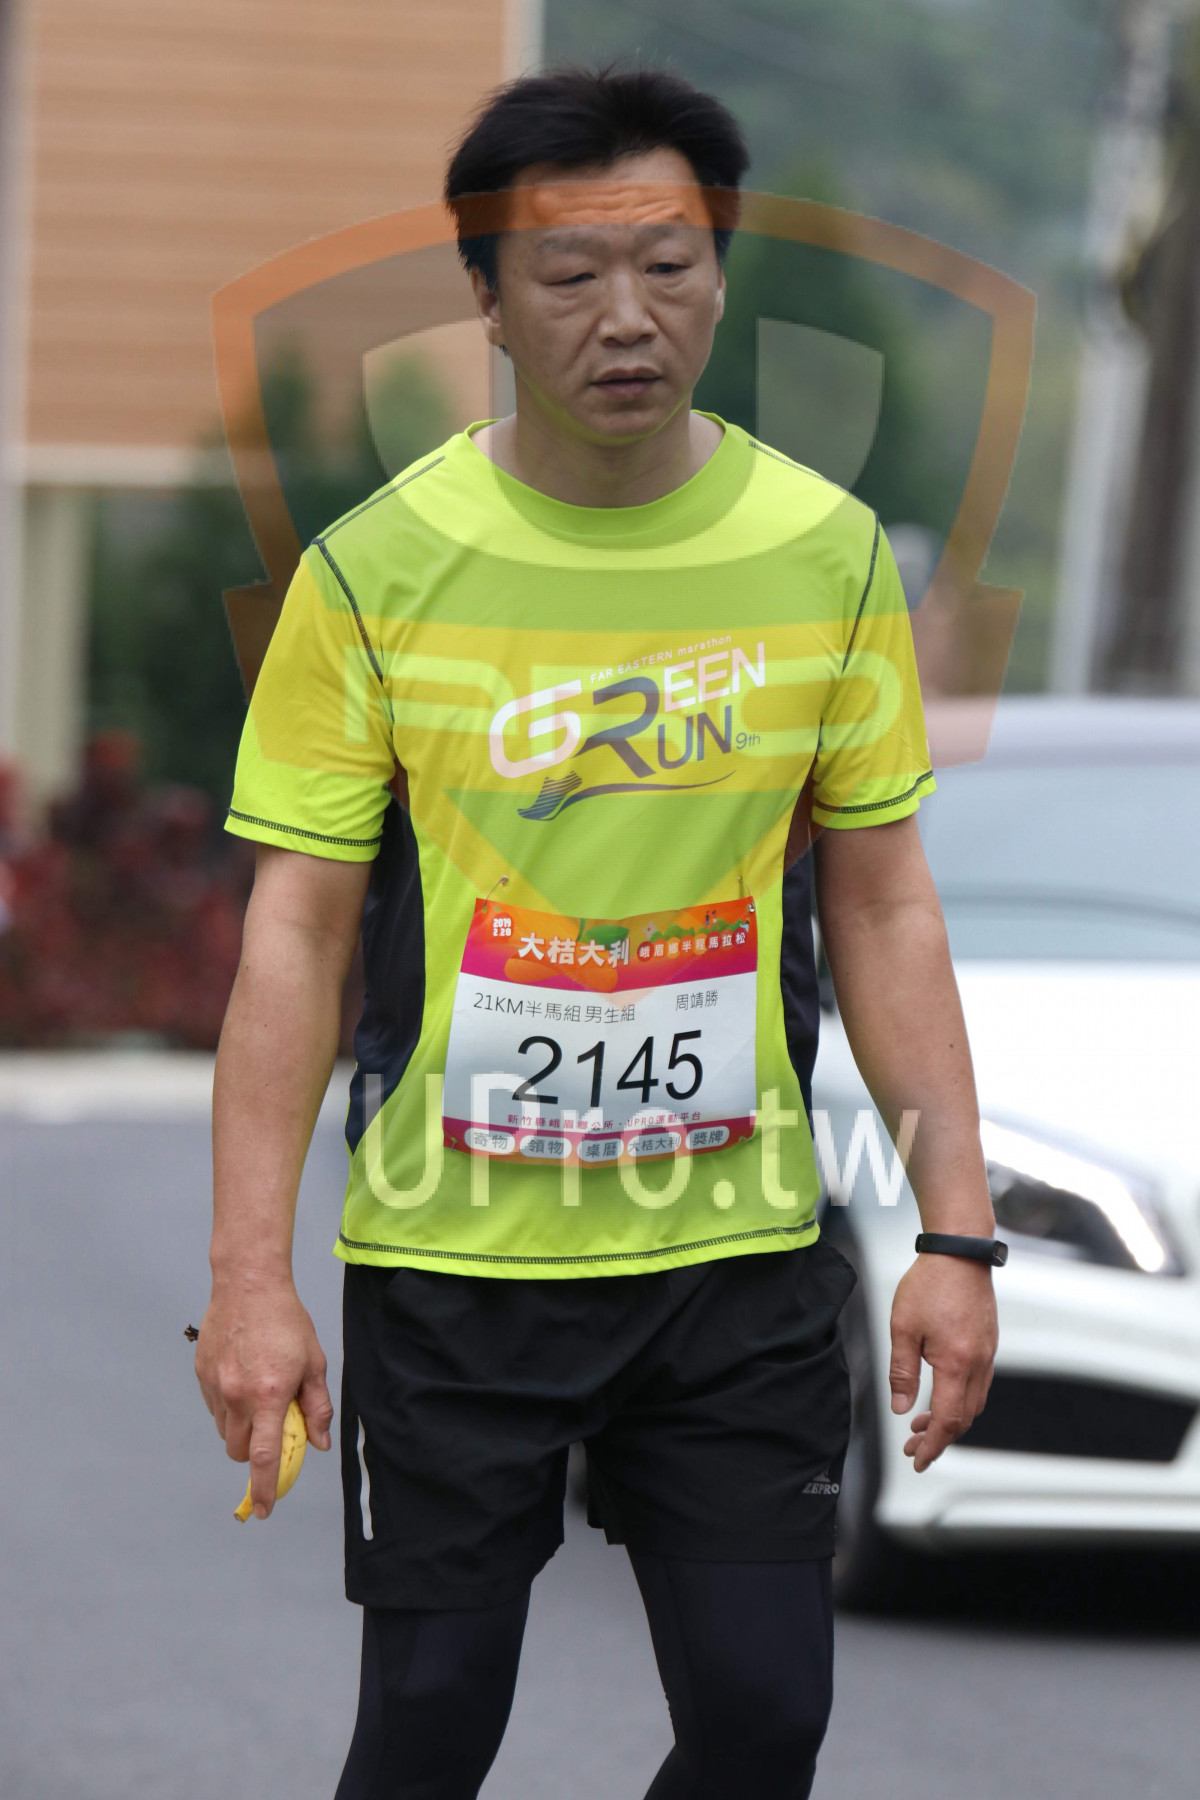 EASTERN marethon,EEN,th,m.in,21KM,2145,,,,,, UPRO, |